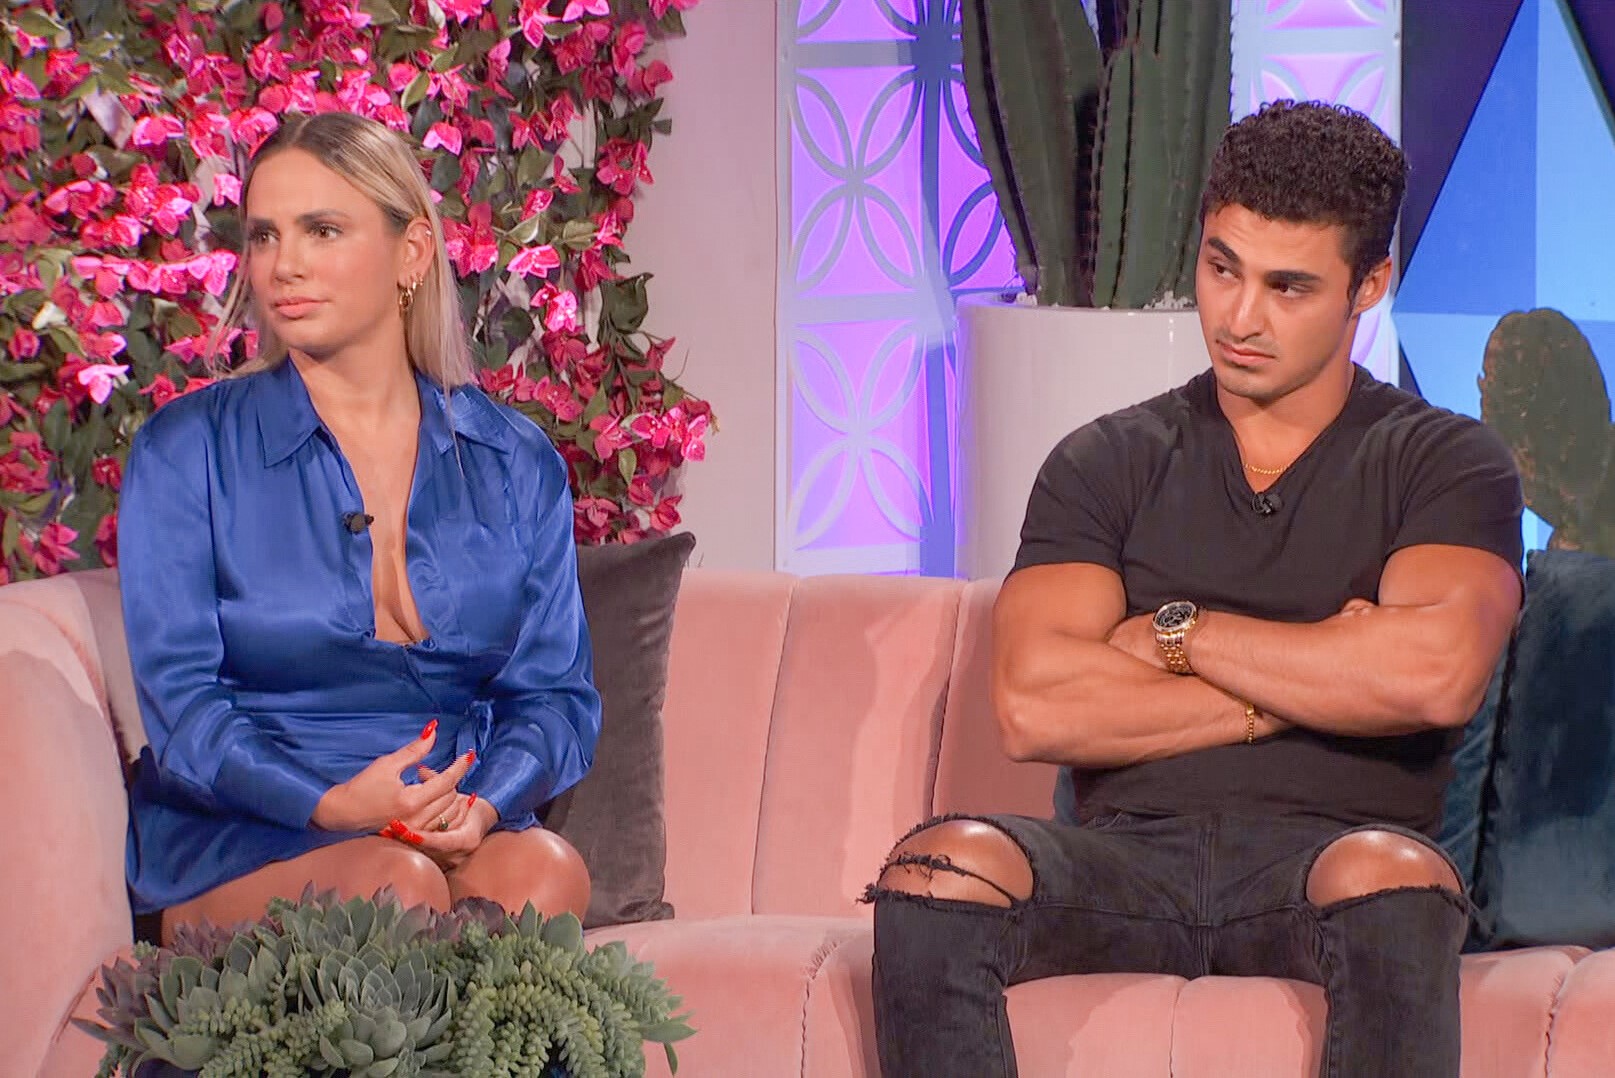 Indy Santos and Joseph Abdin, who starred in 'Big Brother 24' on CBS, sit next to each other on a couch during the jury round table. Indy wears a royal blue long-sleeved dress. Joseph wears a black shirt and black jeans with ripped knee holes.